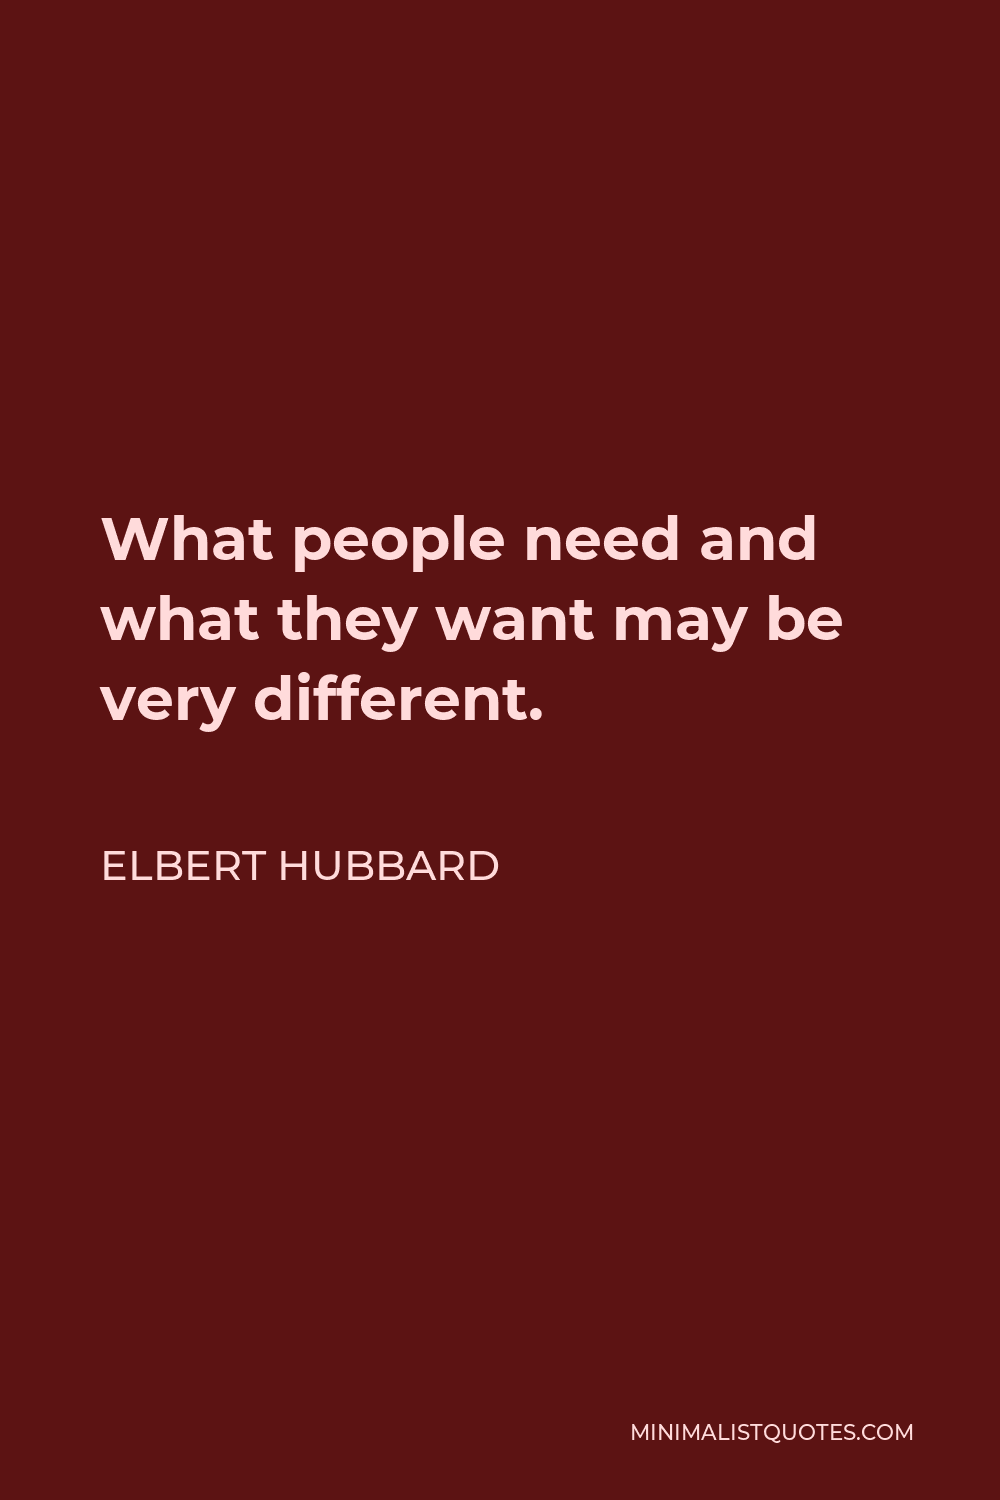 Elbert Hubbard Quote - What people need and what they want may be very different.